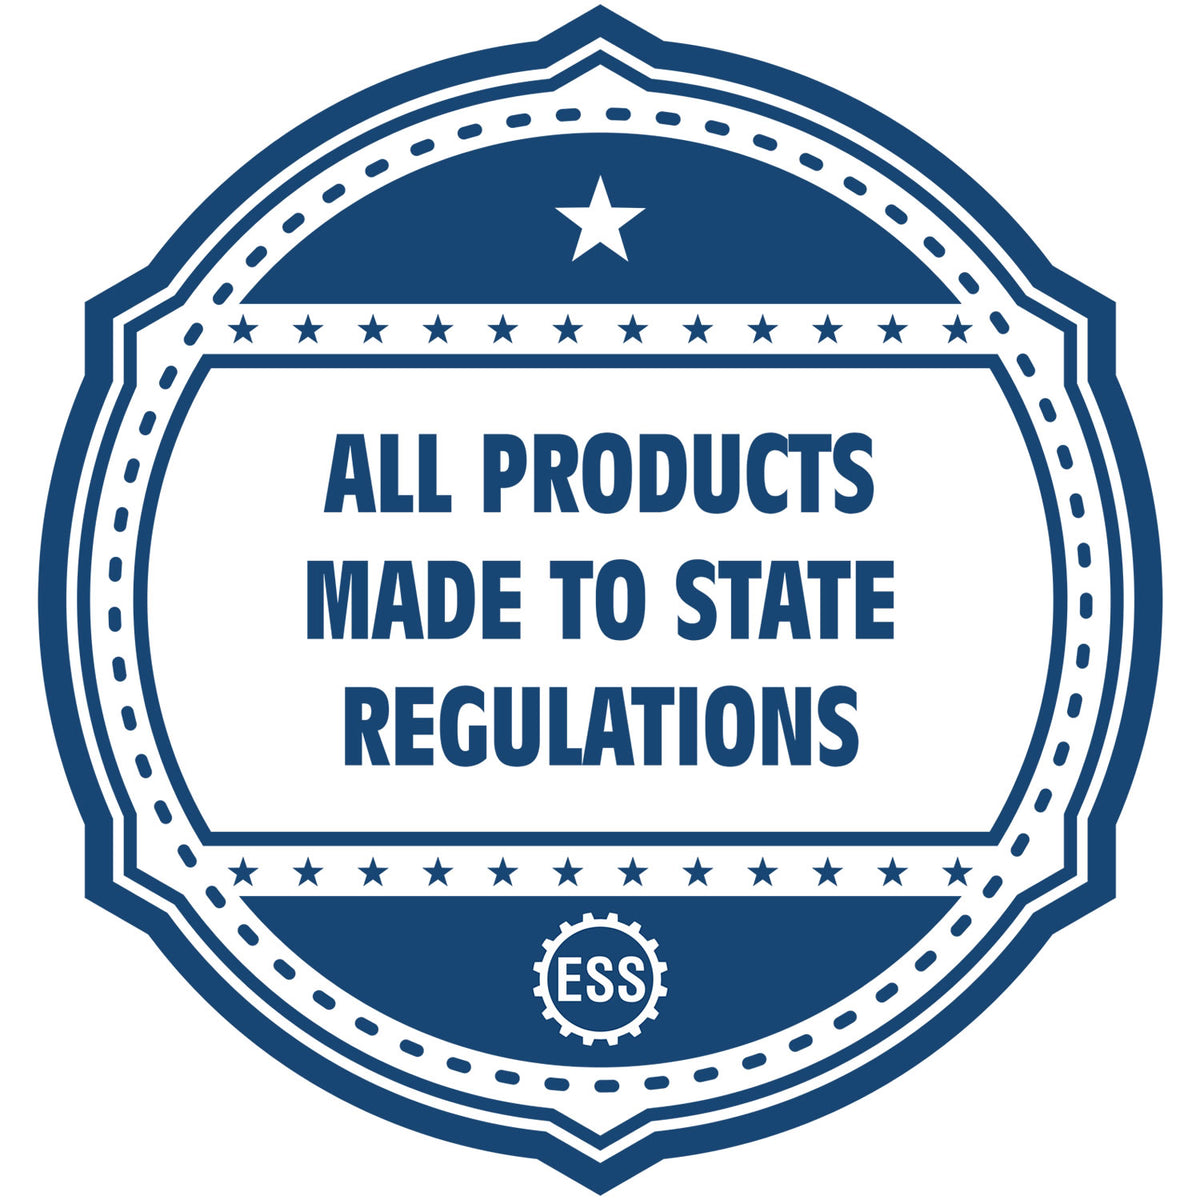 An icon or badge element for the Long Reach North Carolina PE Seal showing that this product is made in compliance with state regulations.